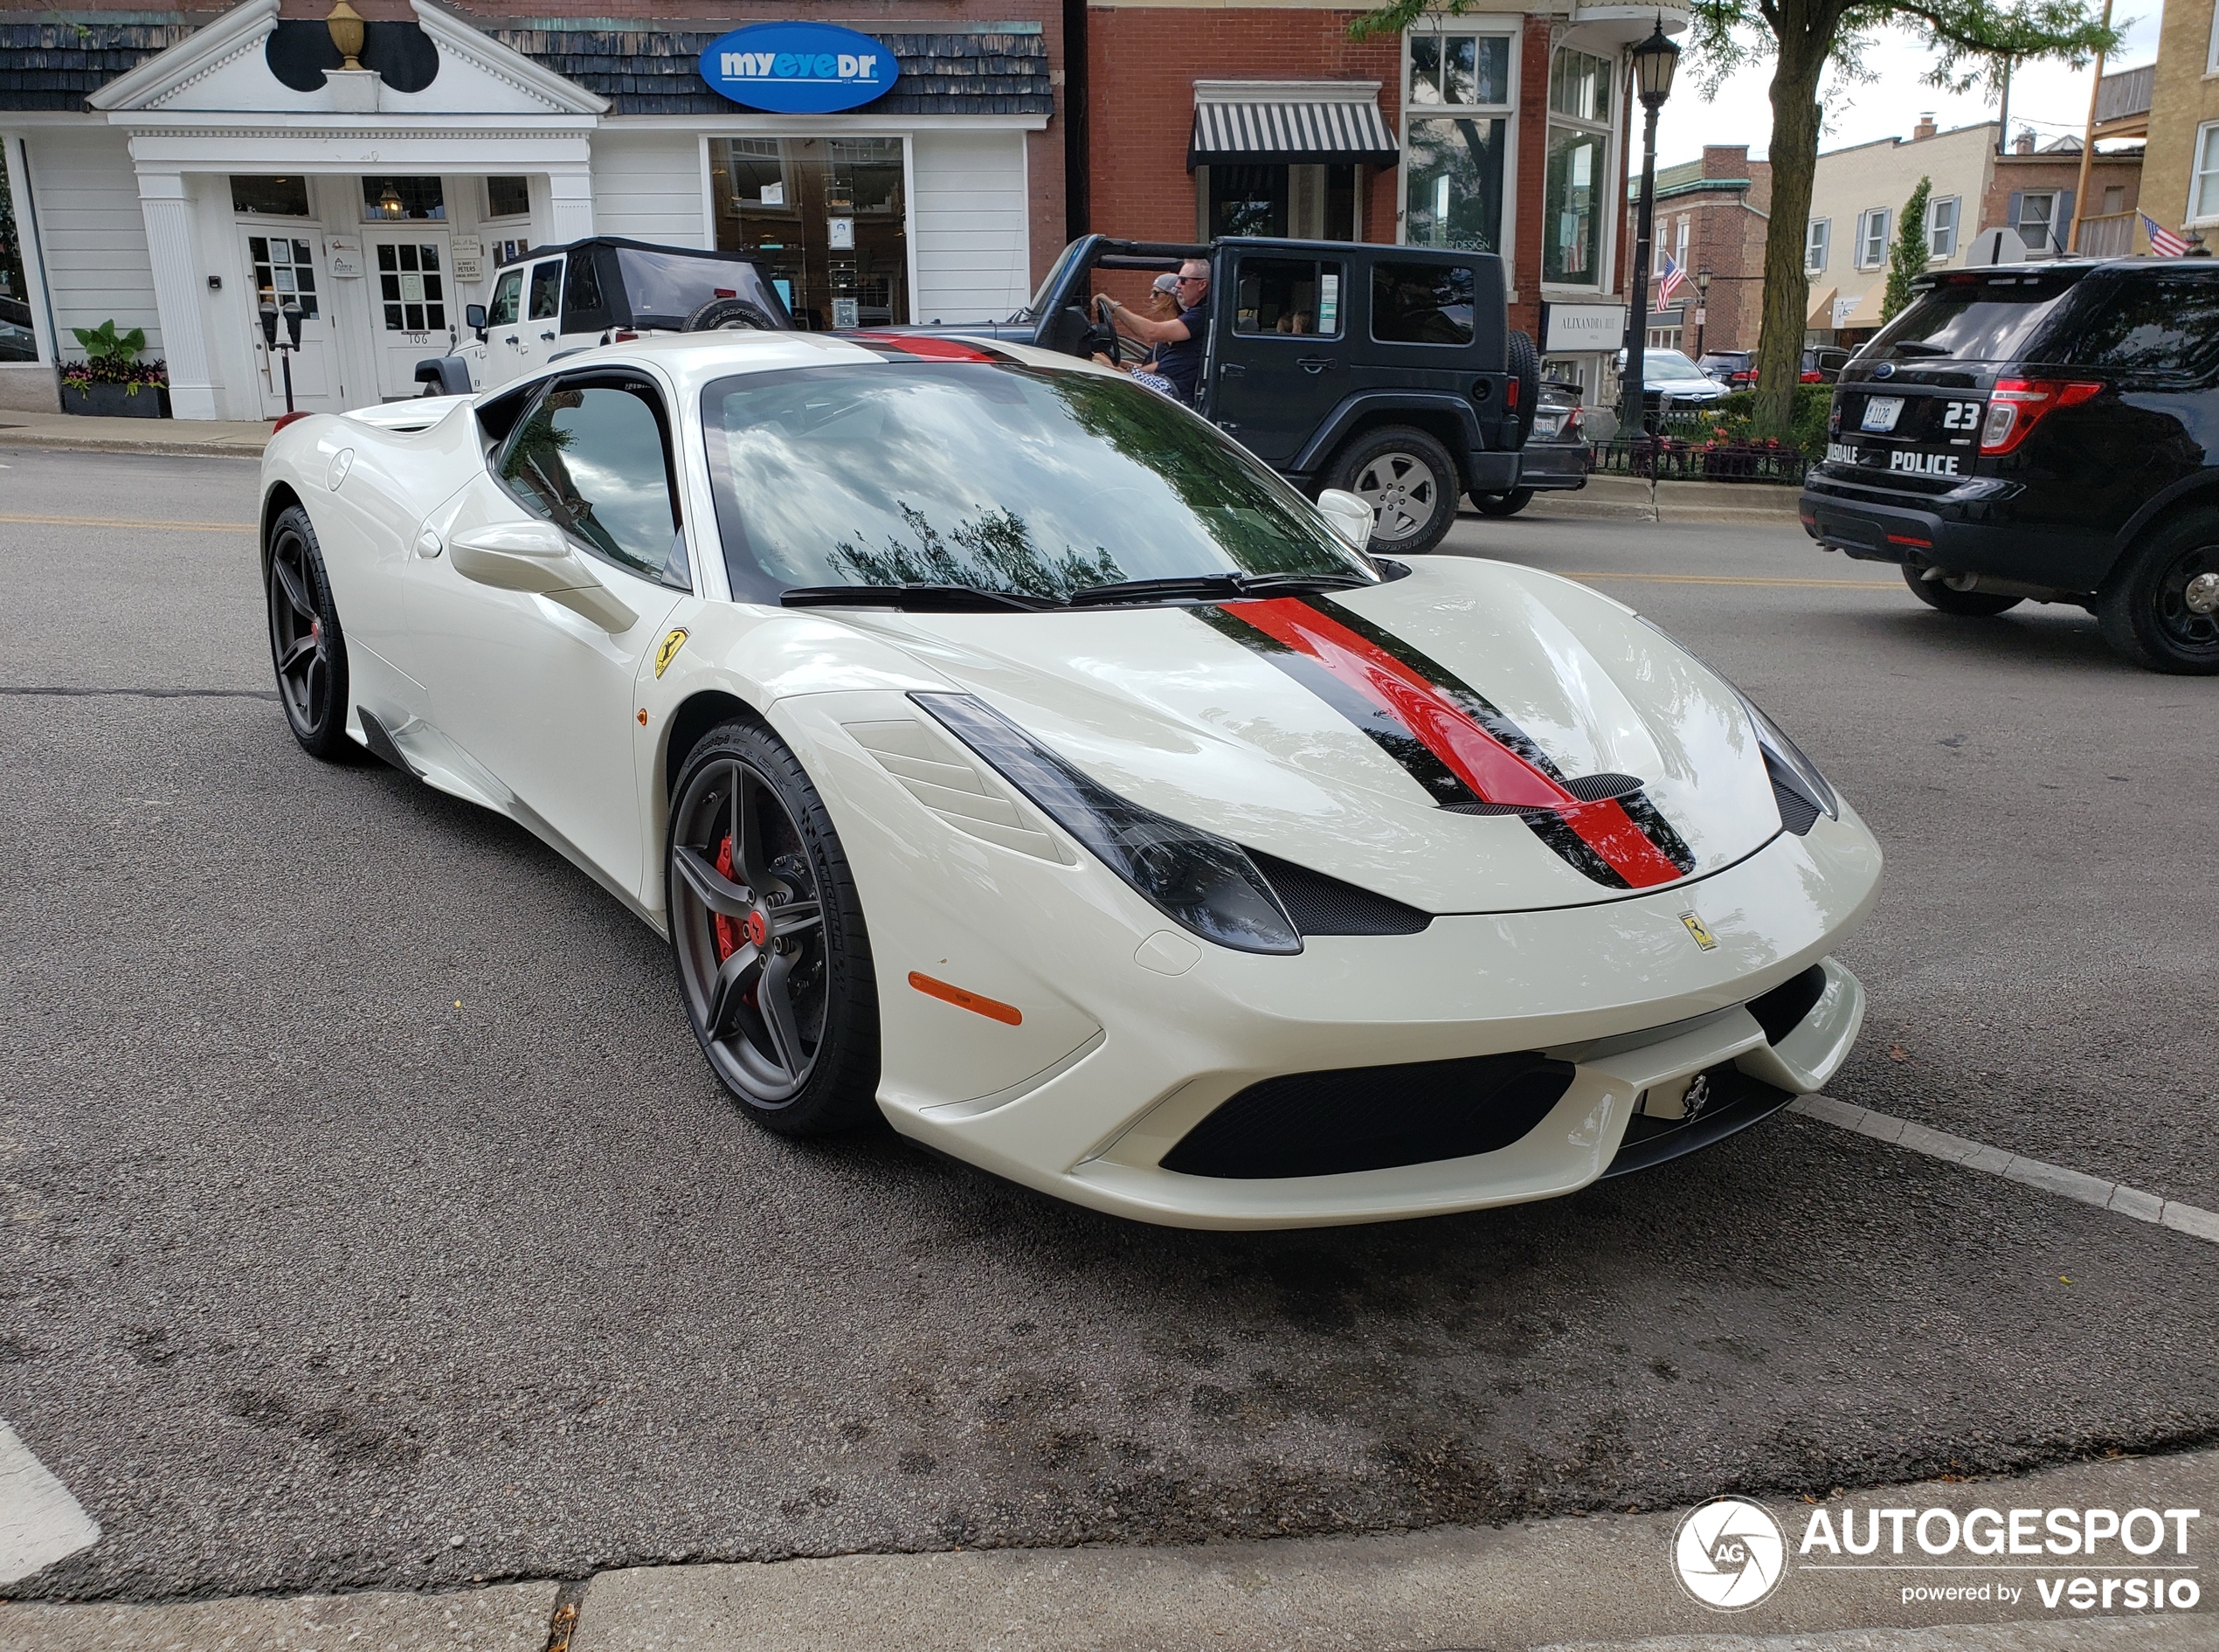 This Ferrari 458 Speciale belongs to the more exquisite category...